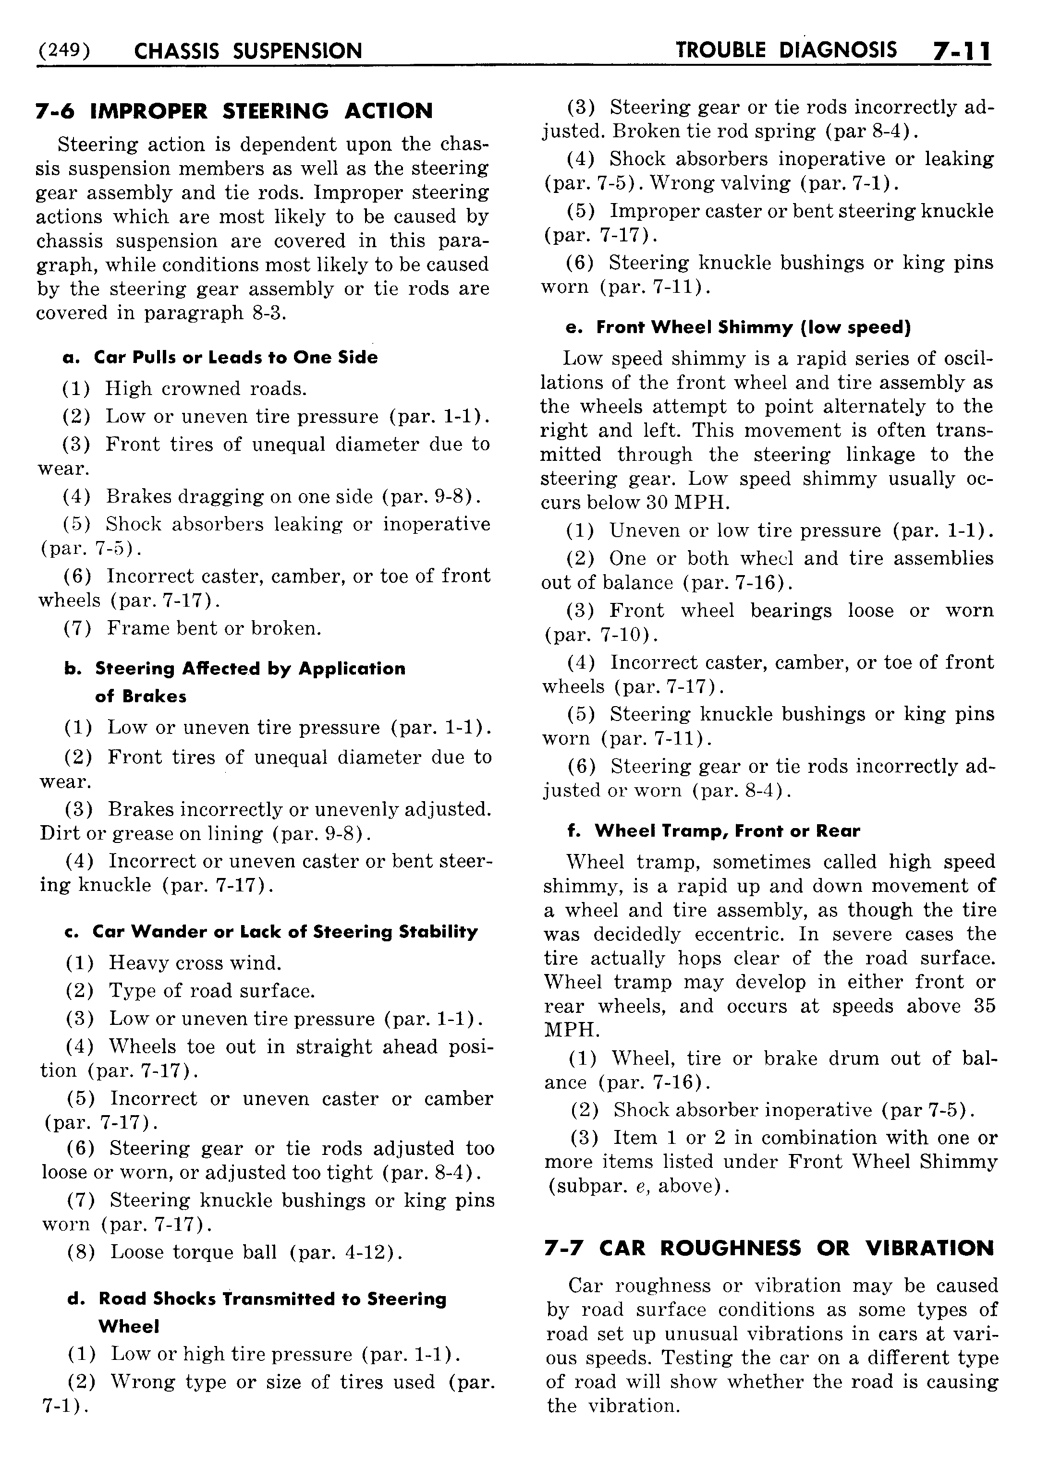 n_08 1956 Buick Shop Manual - Chassis Suspension-011-011.jpg